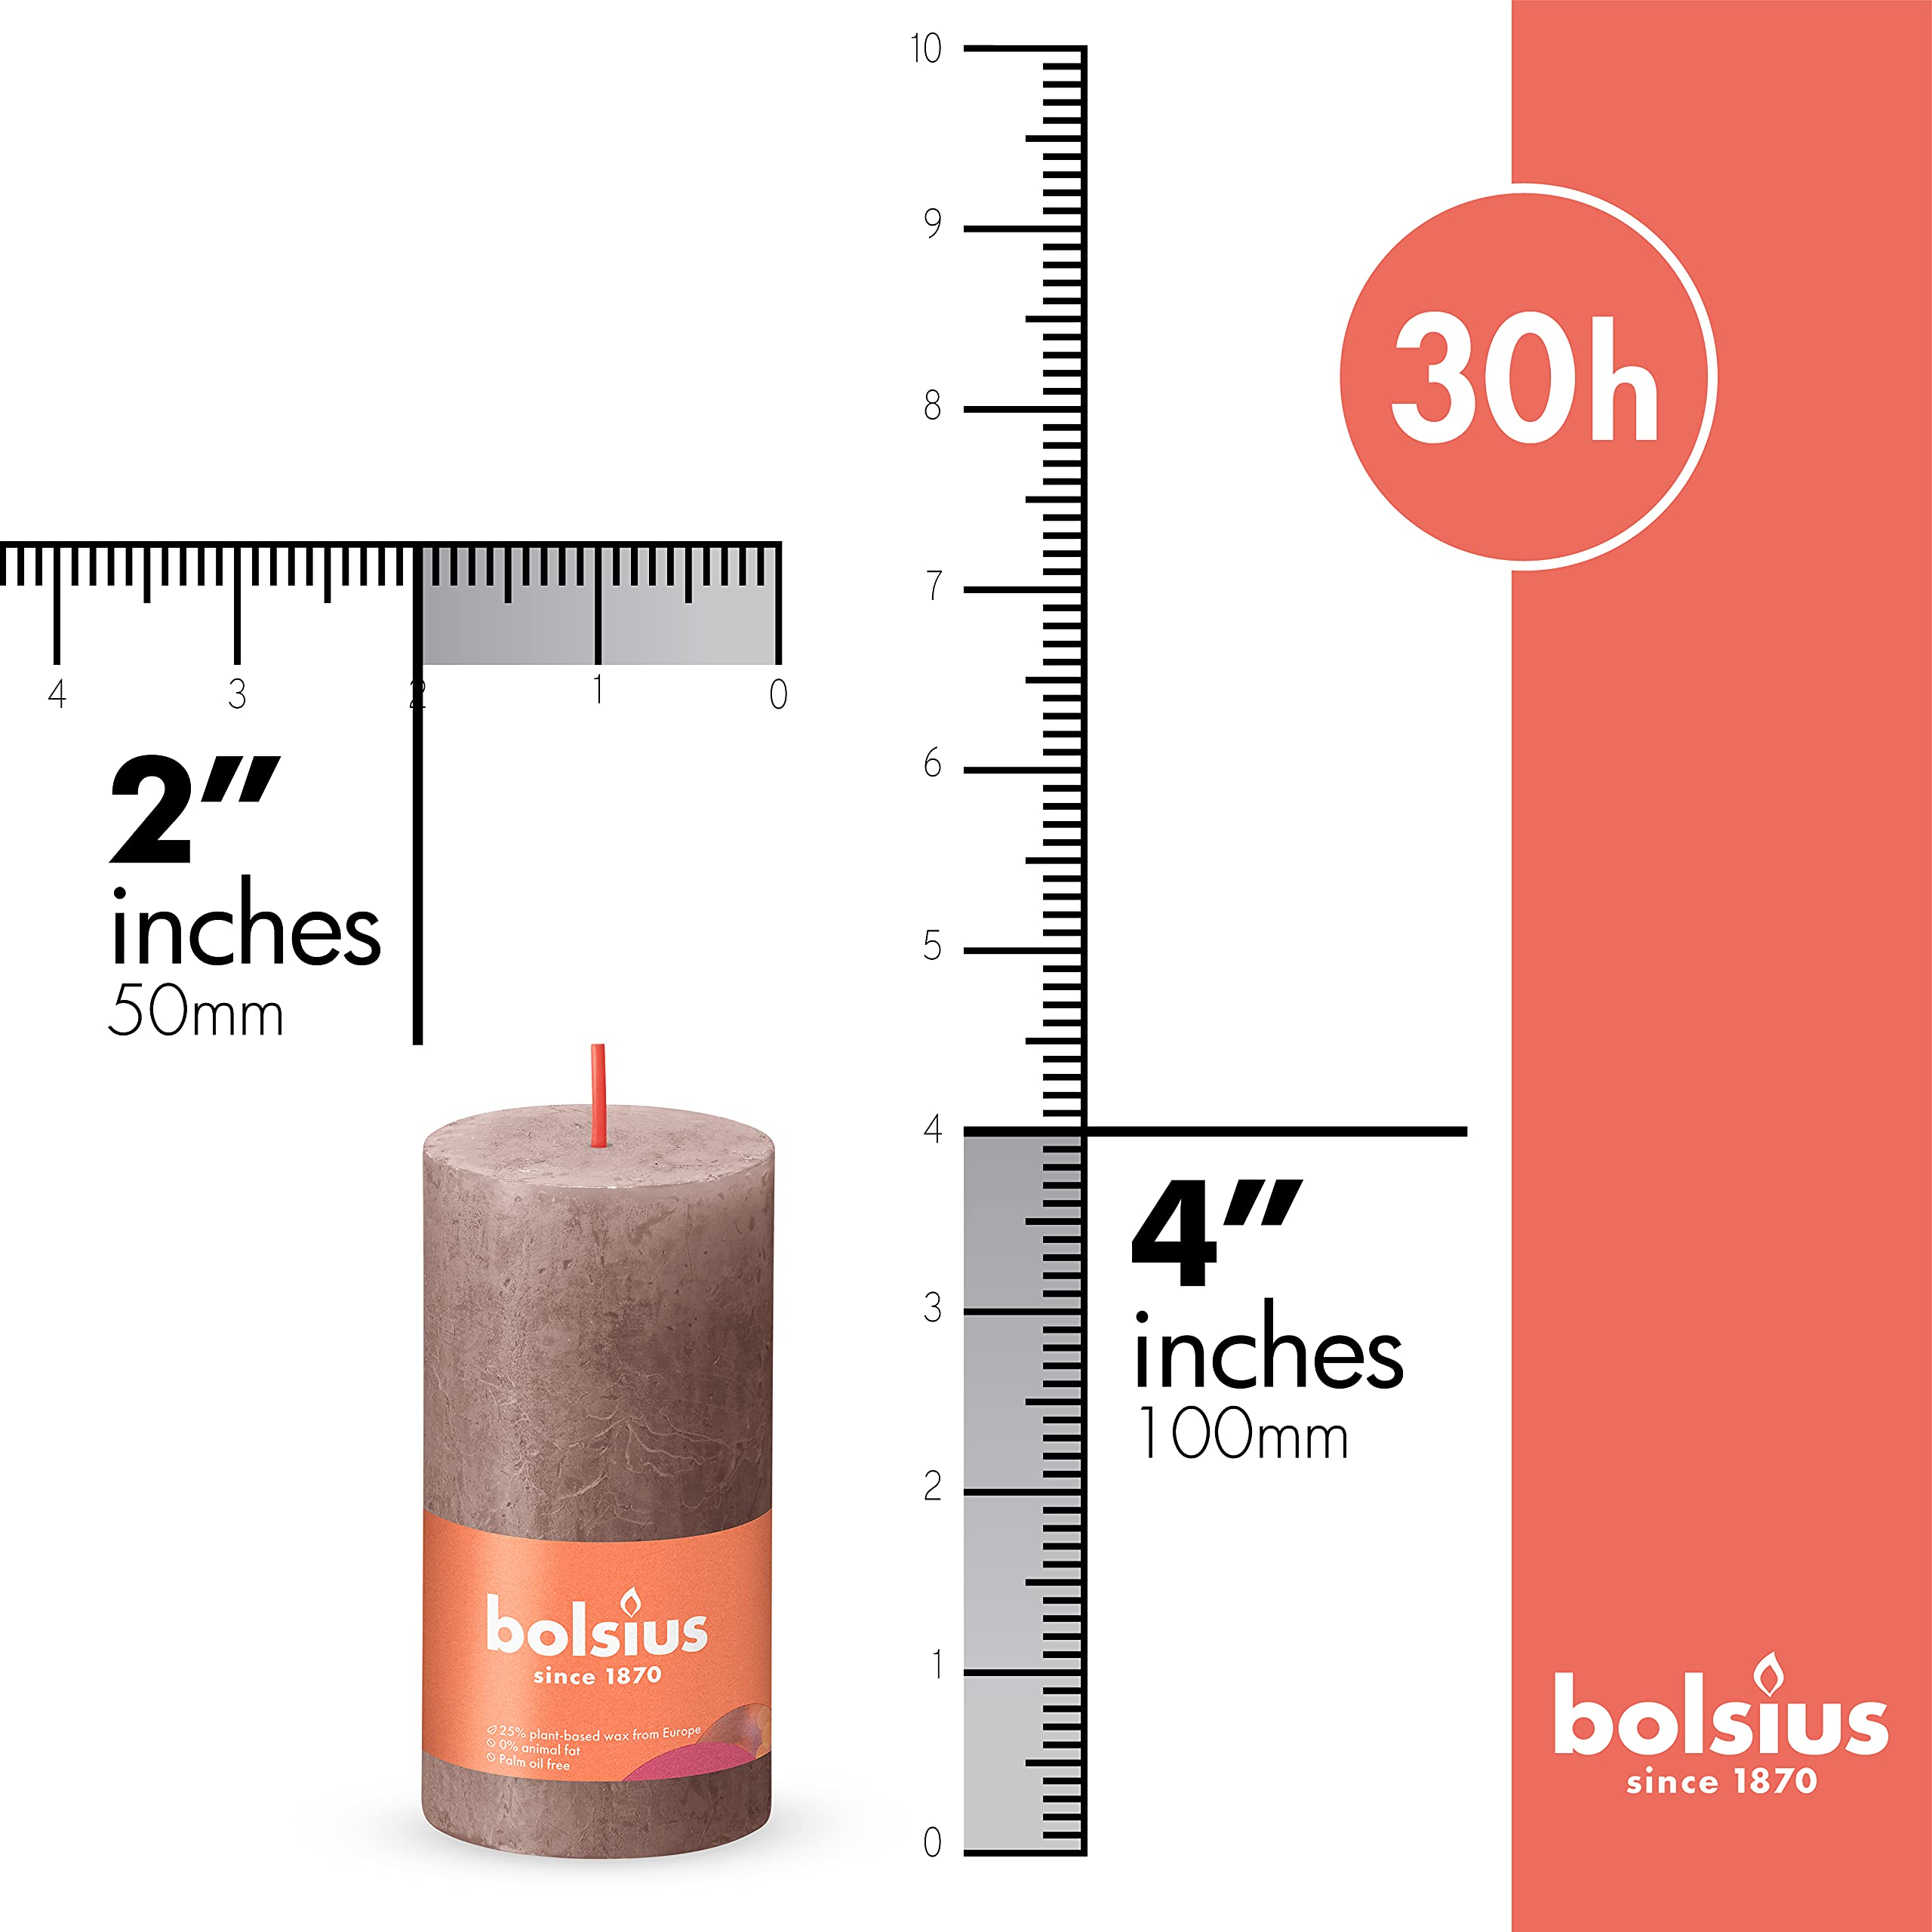 BOLSIUS 4 Pack Taupe Rustic Pillar Candles - 2 X 4 Inches - Premium European Quality - Includes Natural Plant-Based Wax - Unscented Dripless Smokeless 30 Hour Party D�cor and Wedding Candles  - Acceptable